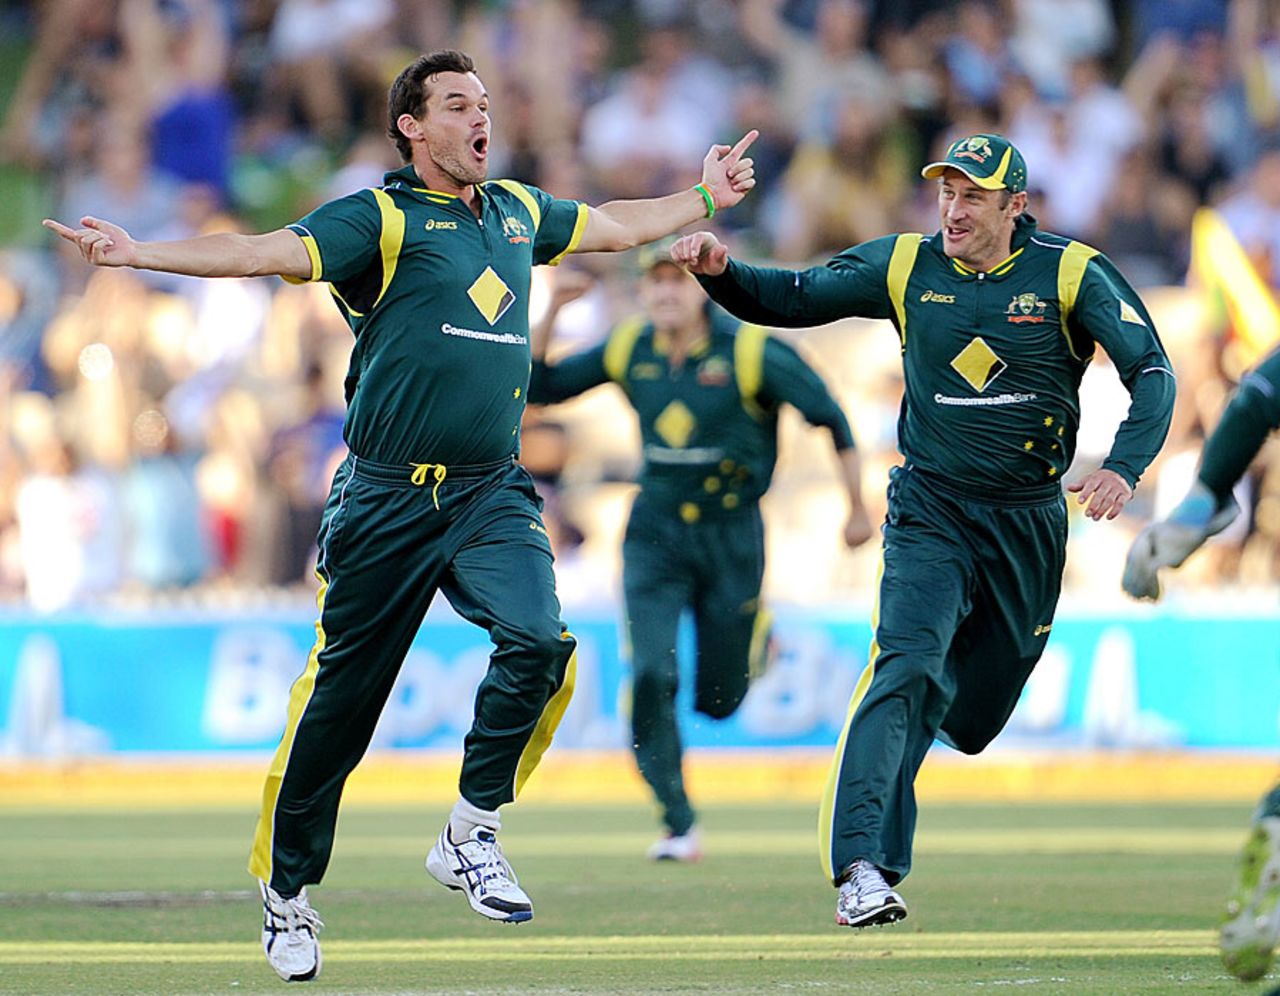 Clint McKay is pumped up after a wicket, Australia v Sri Lanka, CB Series, 3rd final, Adelaide, March 8, 2012